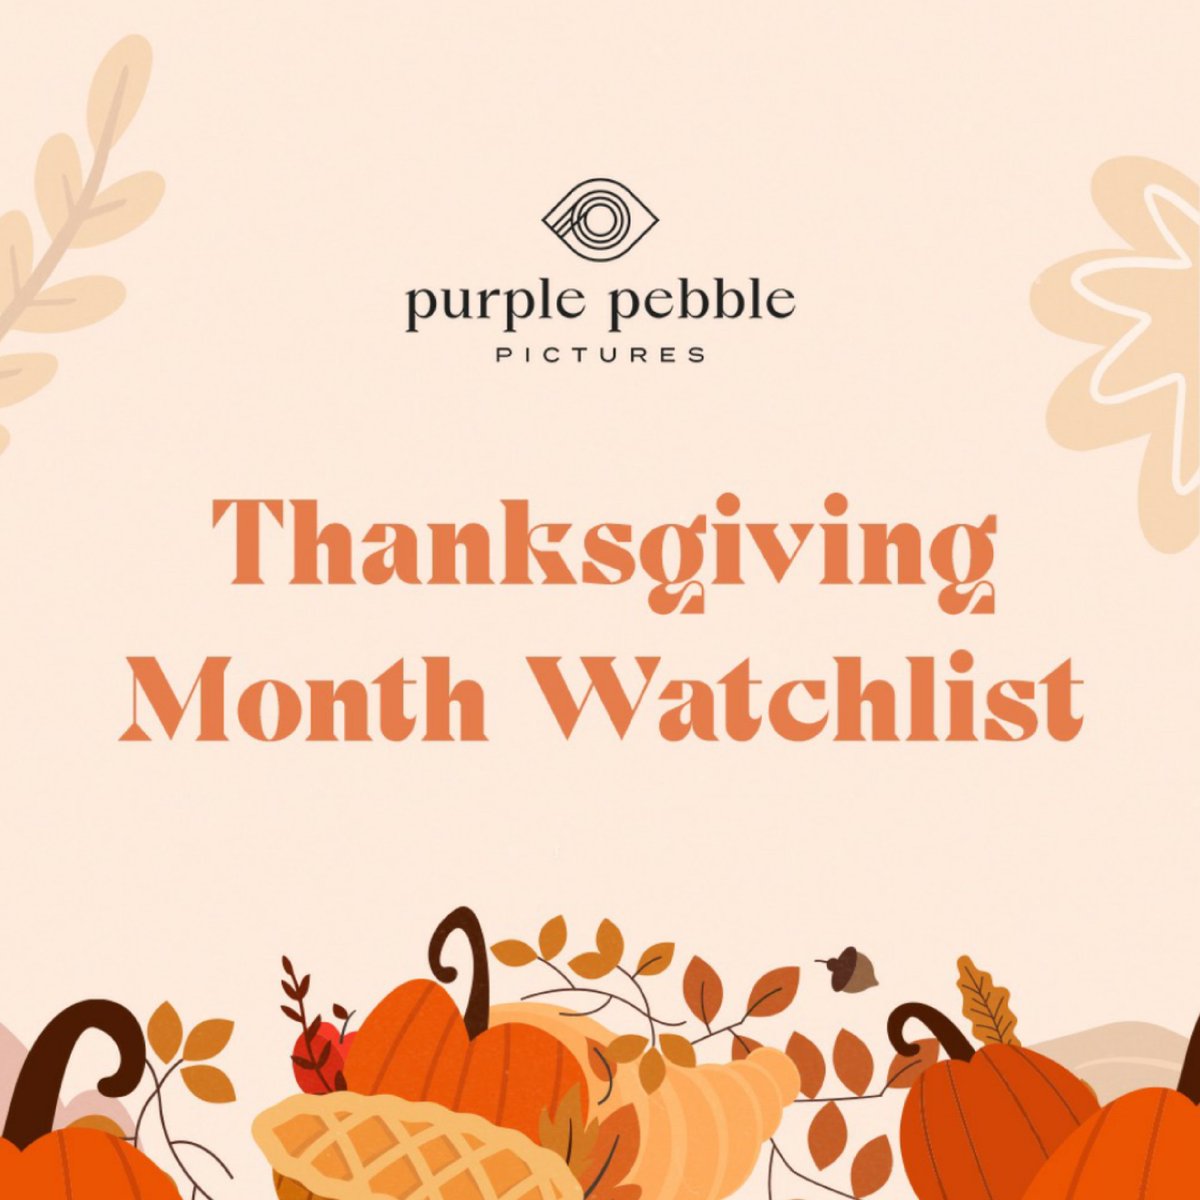 Gobble Gobble! With turkey day around the corner, let’s get all set for thanksgiving our specially curated list of movies hand picked to get you in the thanksgiving spirit! #ThanksgivingWatchList